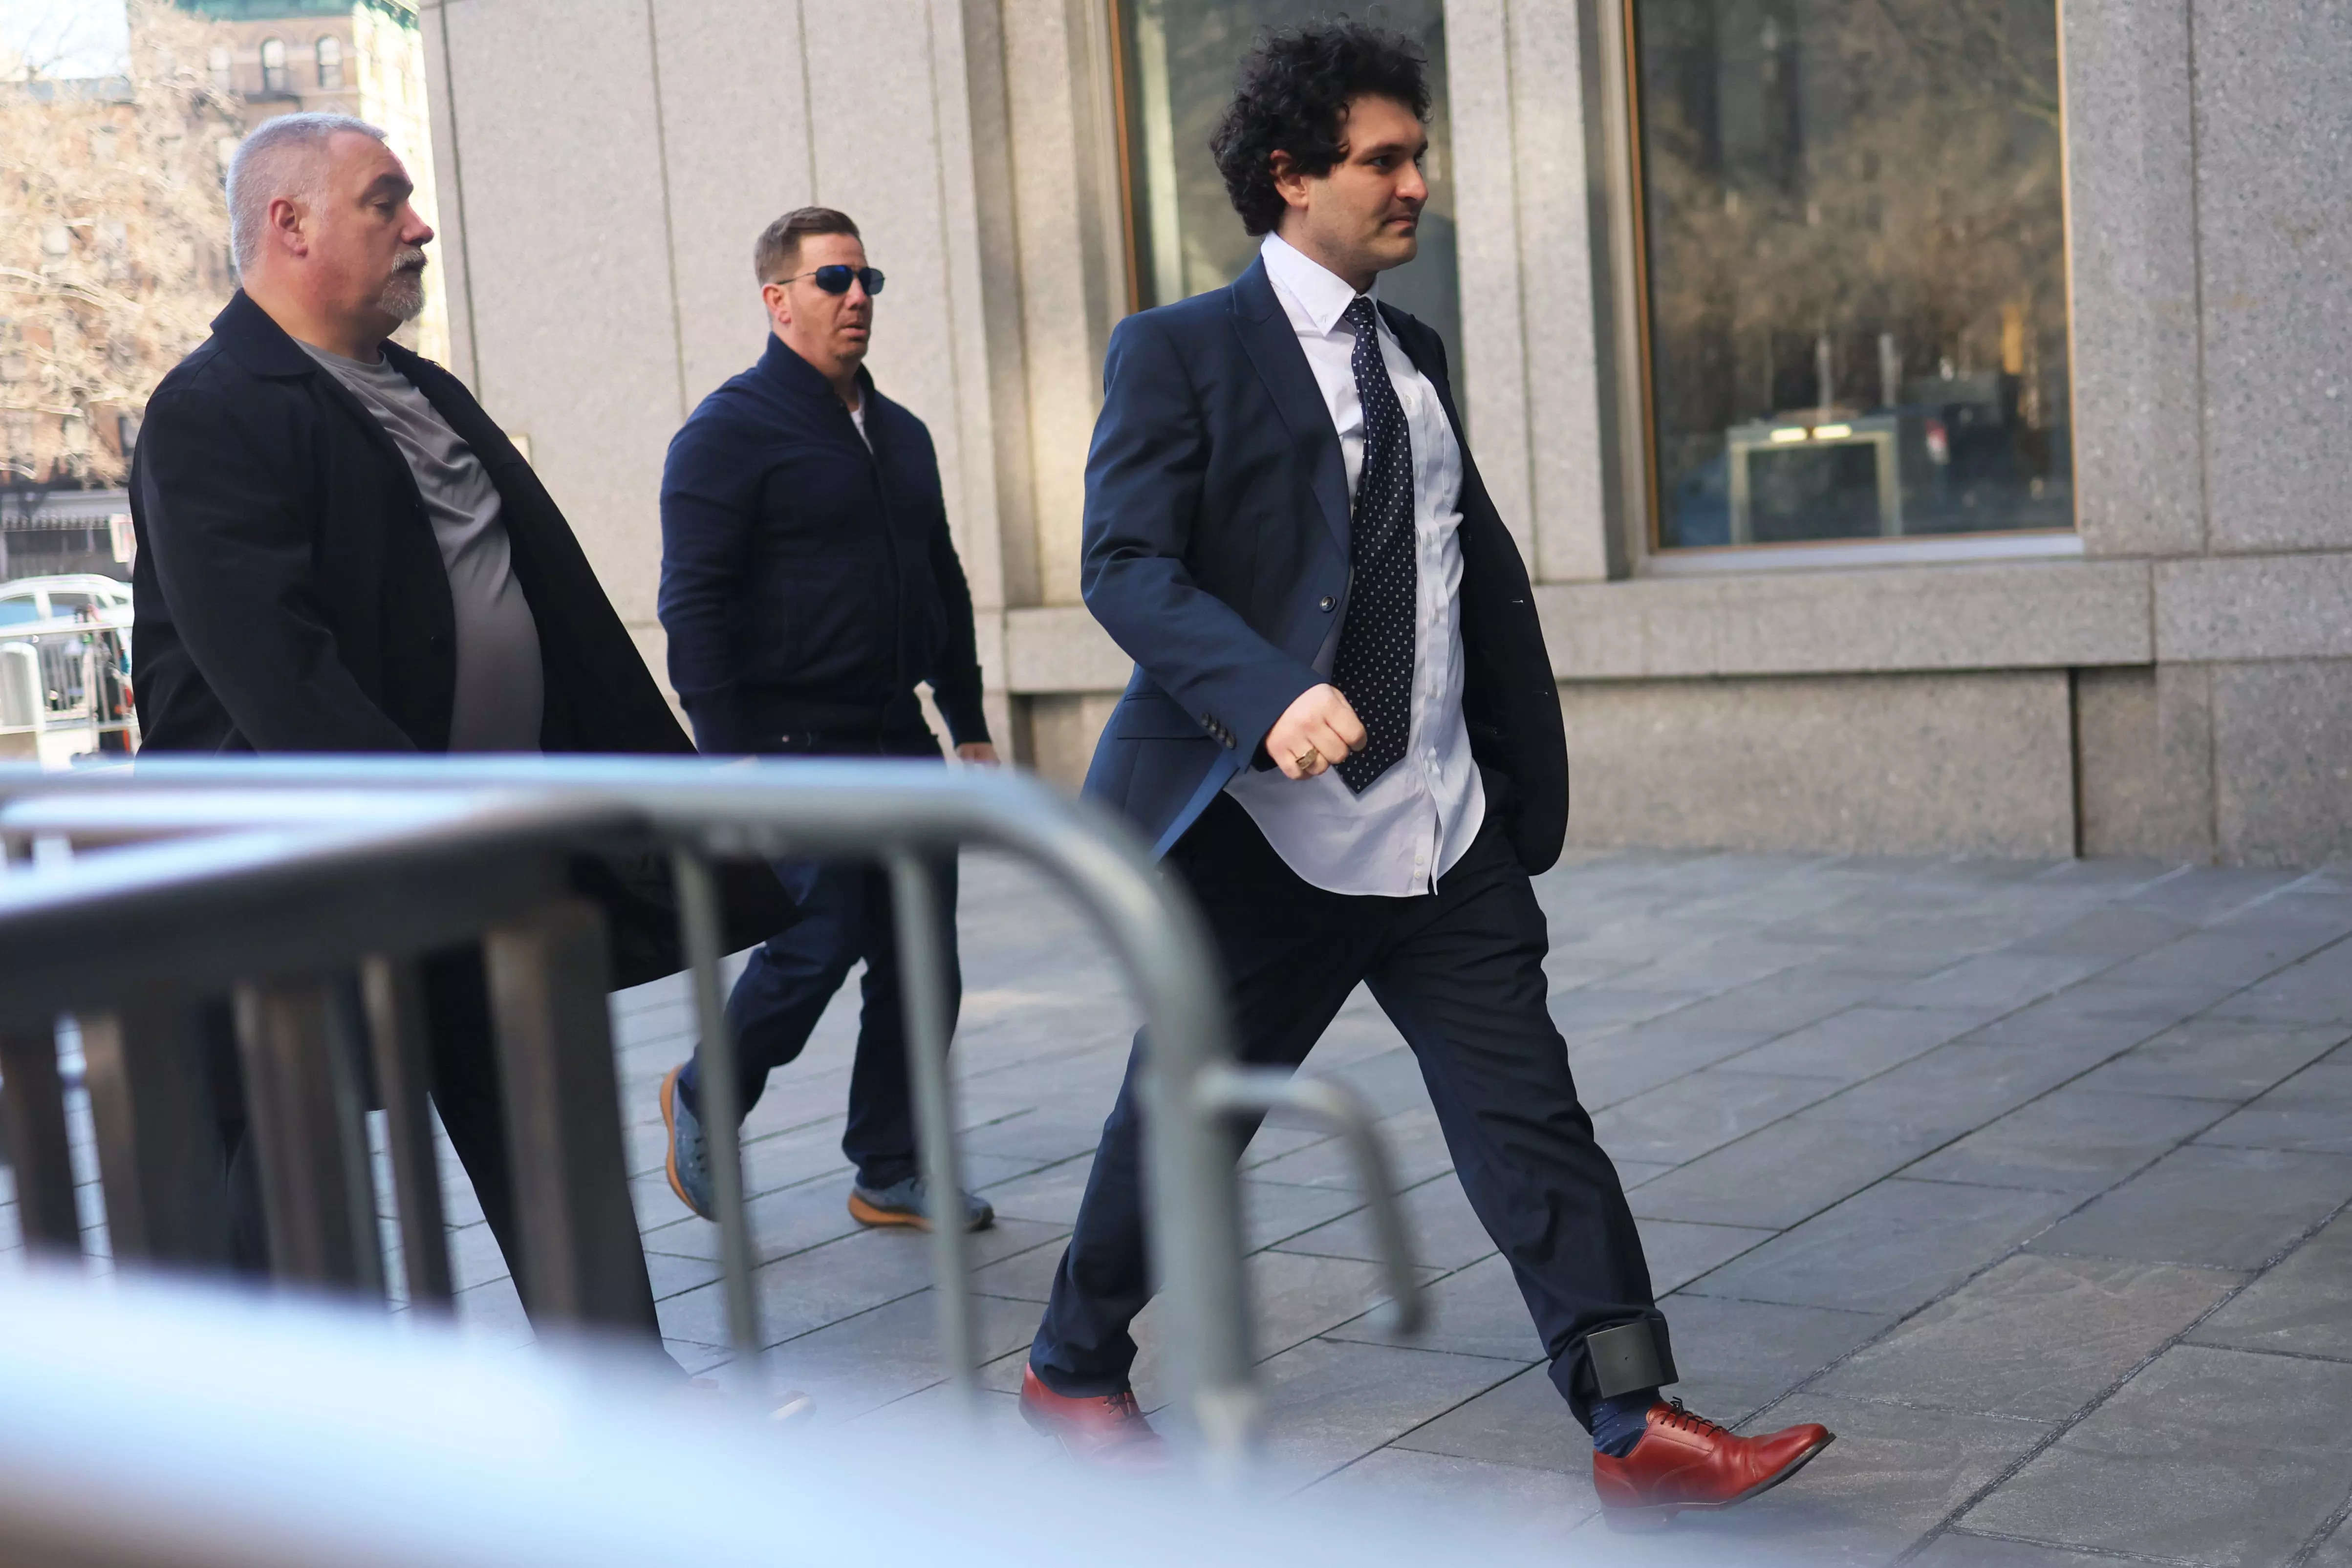 FTX Founder Sam Bankman-Fried arrives at Manhattan Federal Court for a court appearance on March 30, 2023, with his shirt untucked and an ankle tag.